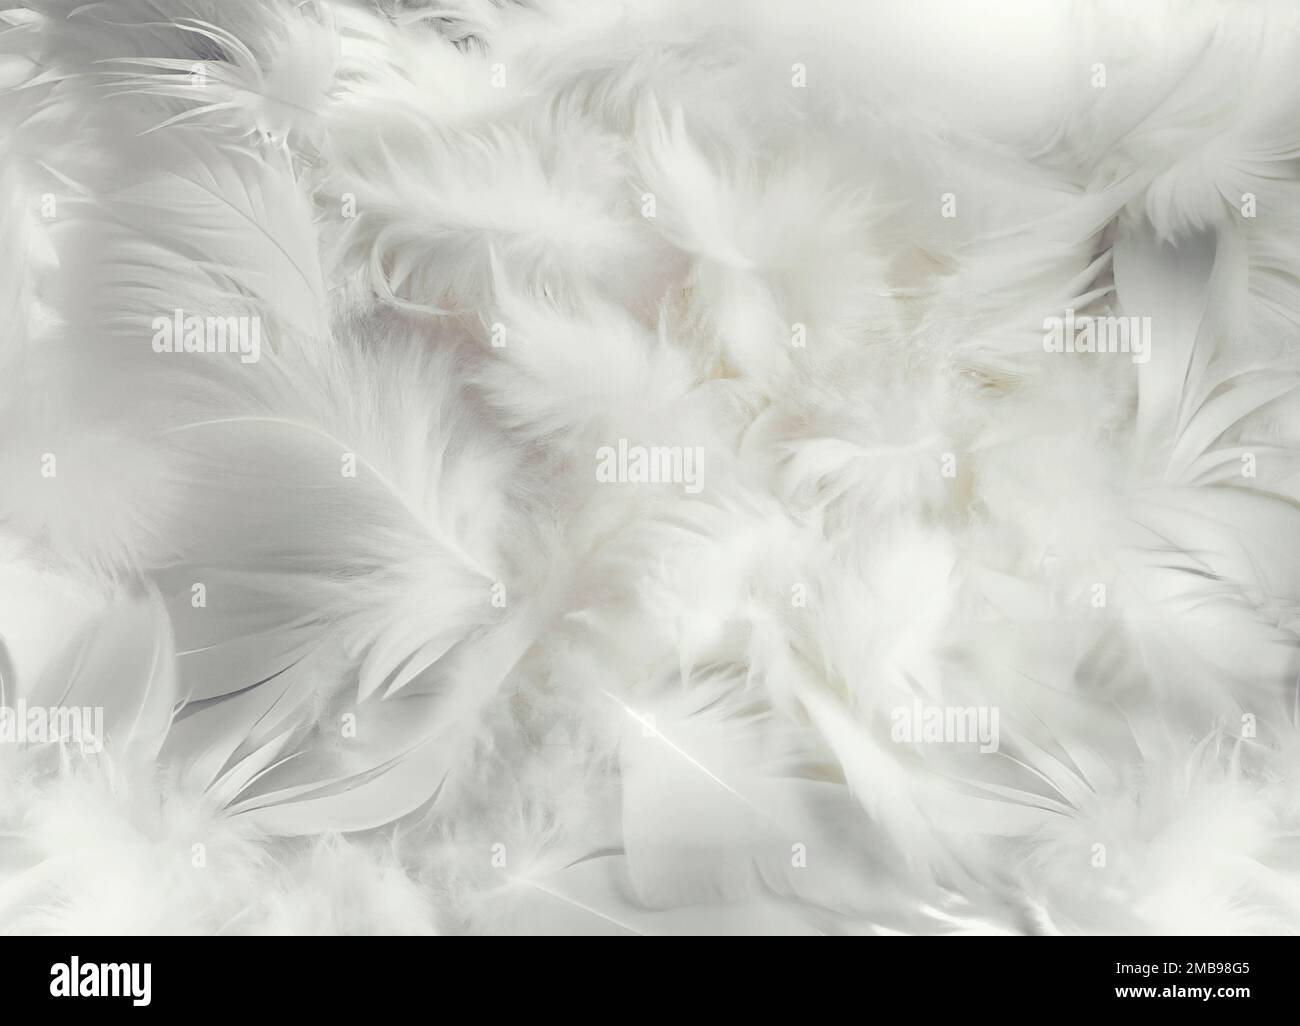 Abstract background of fluffy soft white feathers in various sizes collected in heap Stock Photo